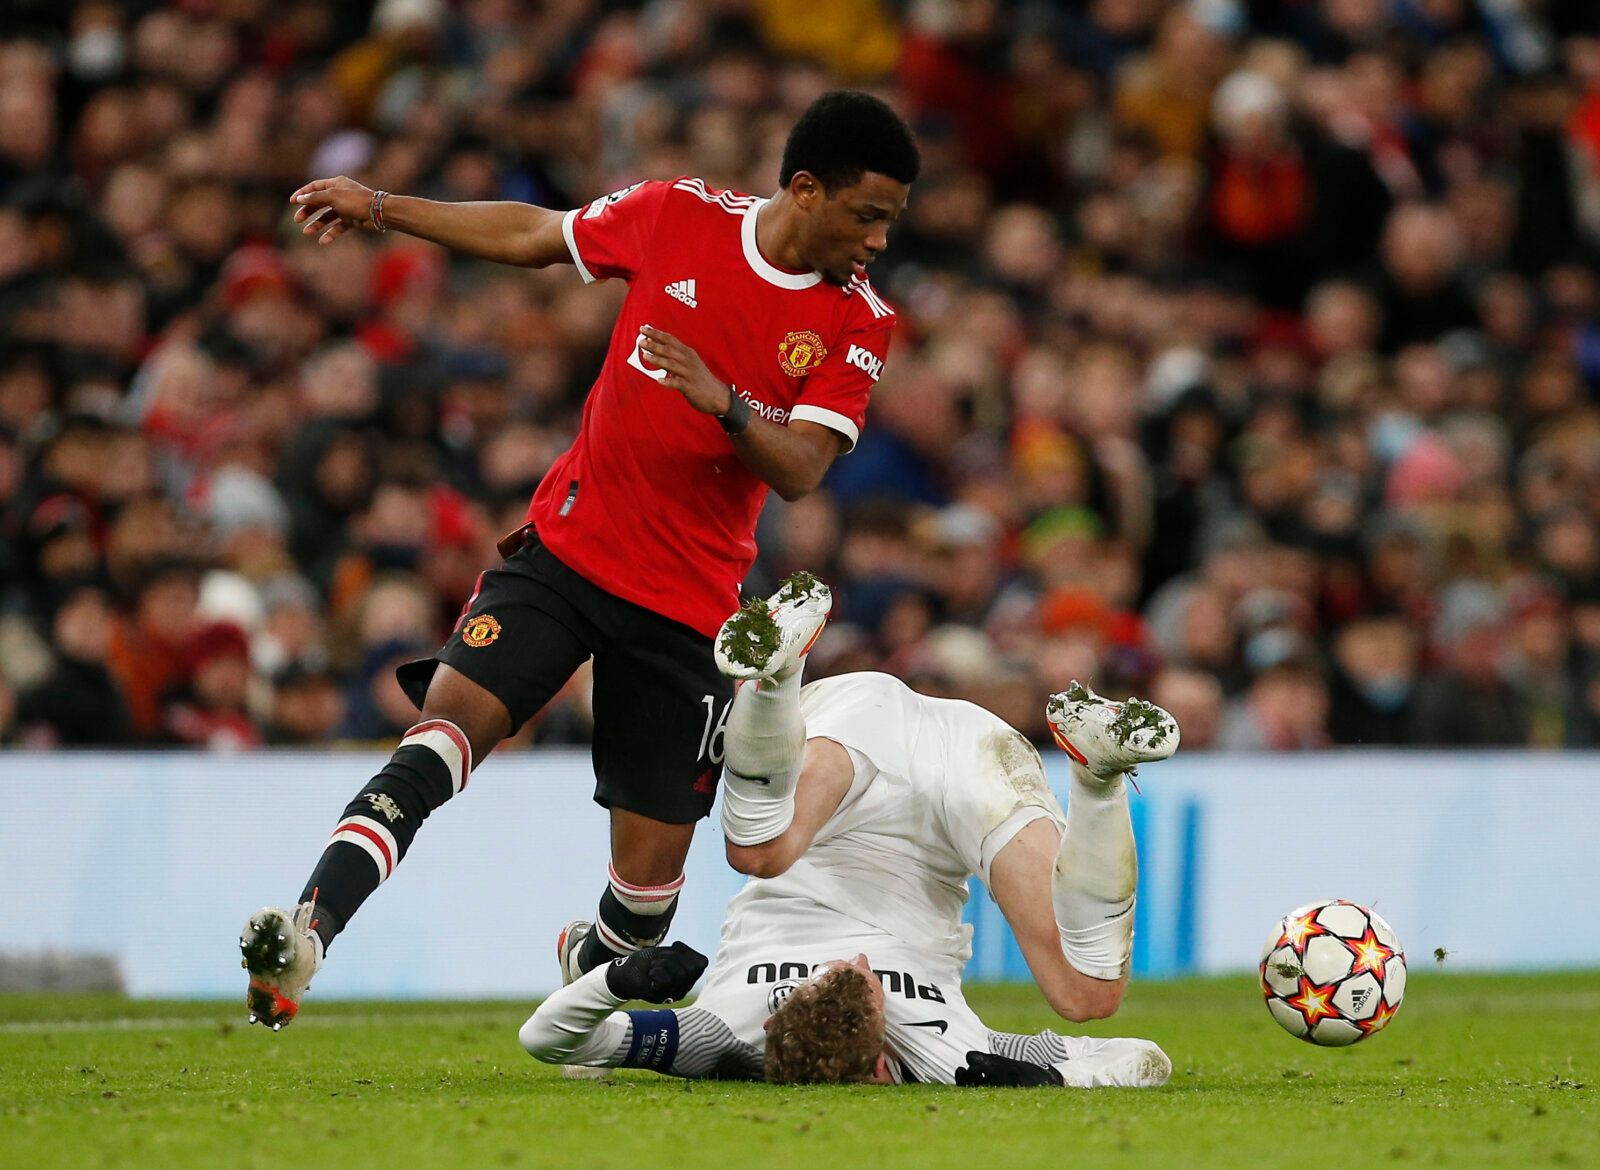 Soccer Football - Champions League - Group F - Manchester United v Young Boys - Old Trafford, Manchester, Britain - December 8, 2021 Manchester United's Amad Diallo in action with Young Boys' Fabian Lustenberger REUTERS/Craig Brough